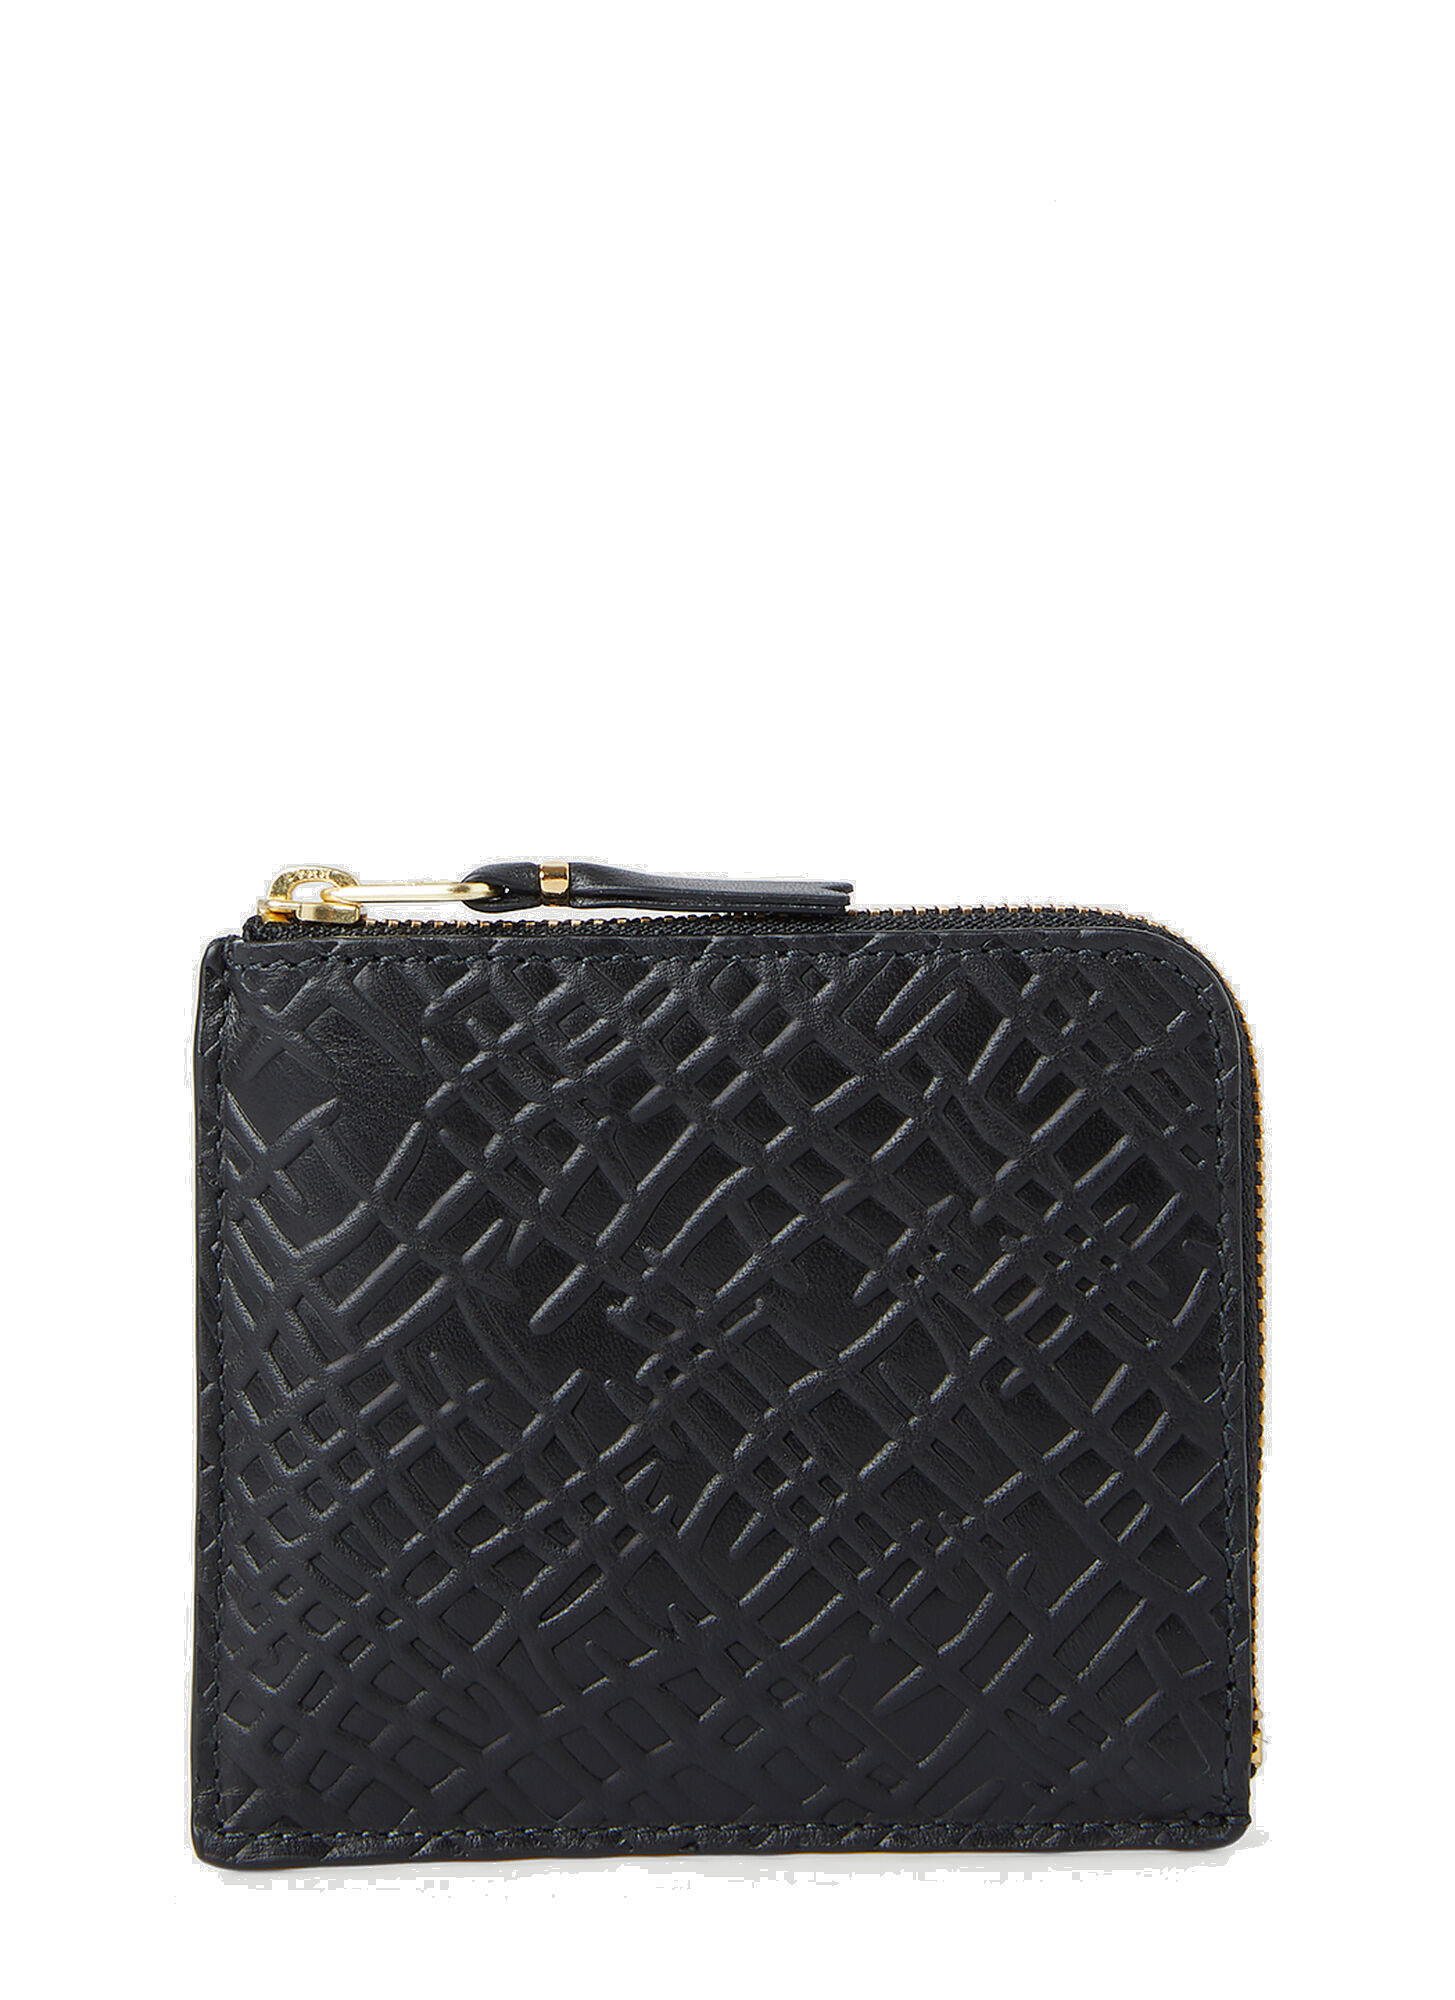 Embossed Roots Wallet in Black Comme des Garcons Wallets